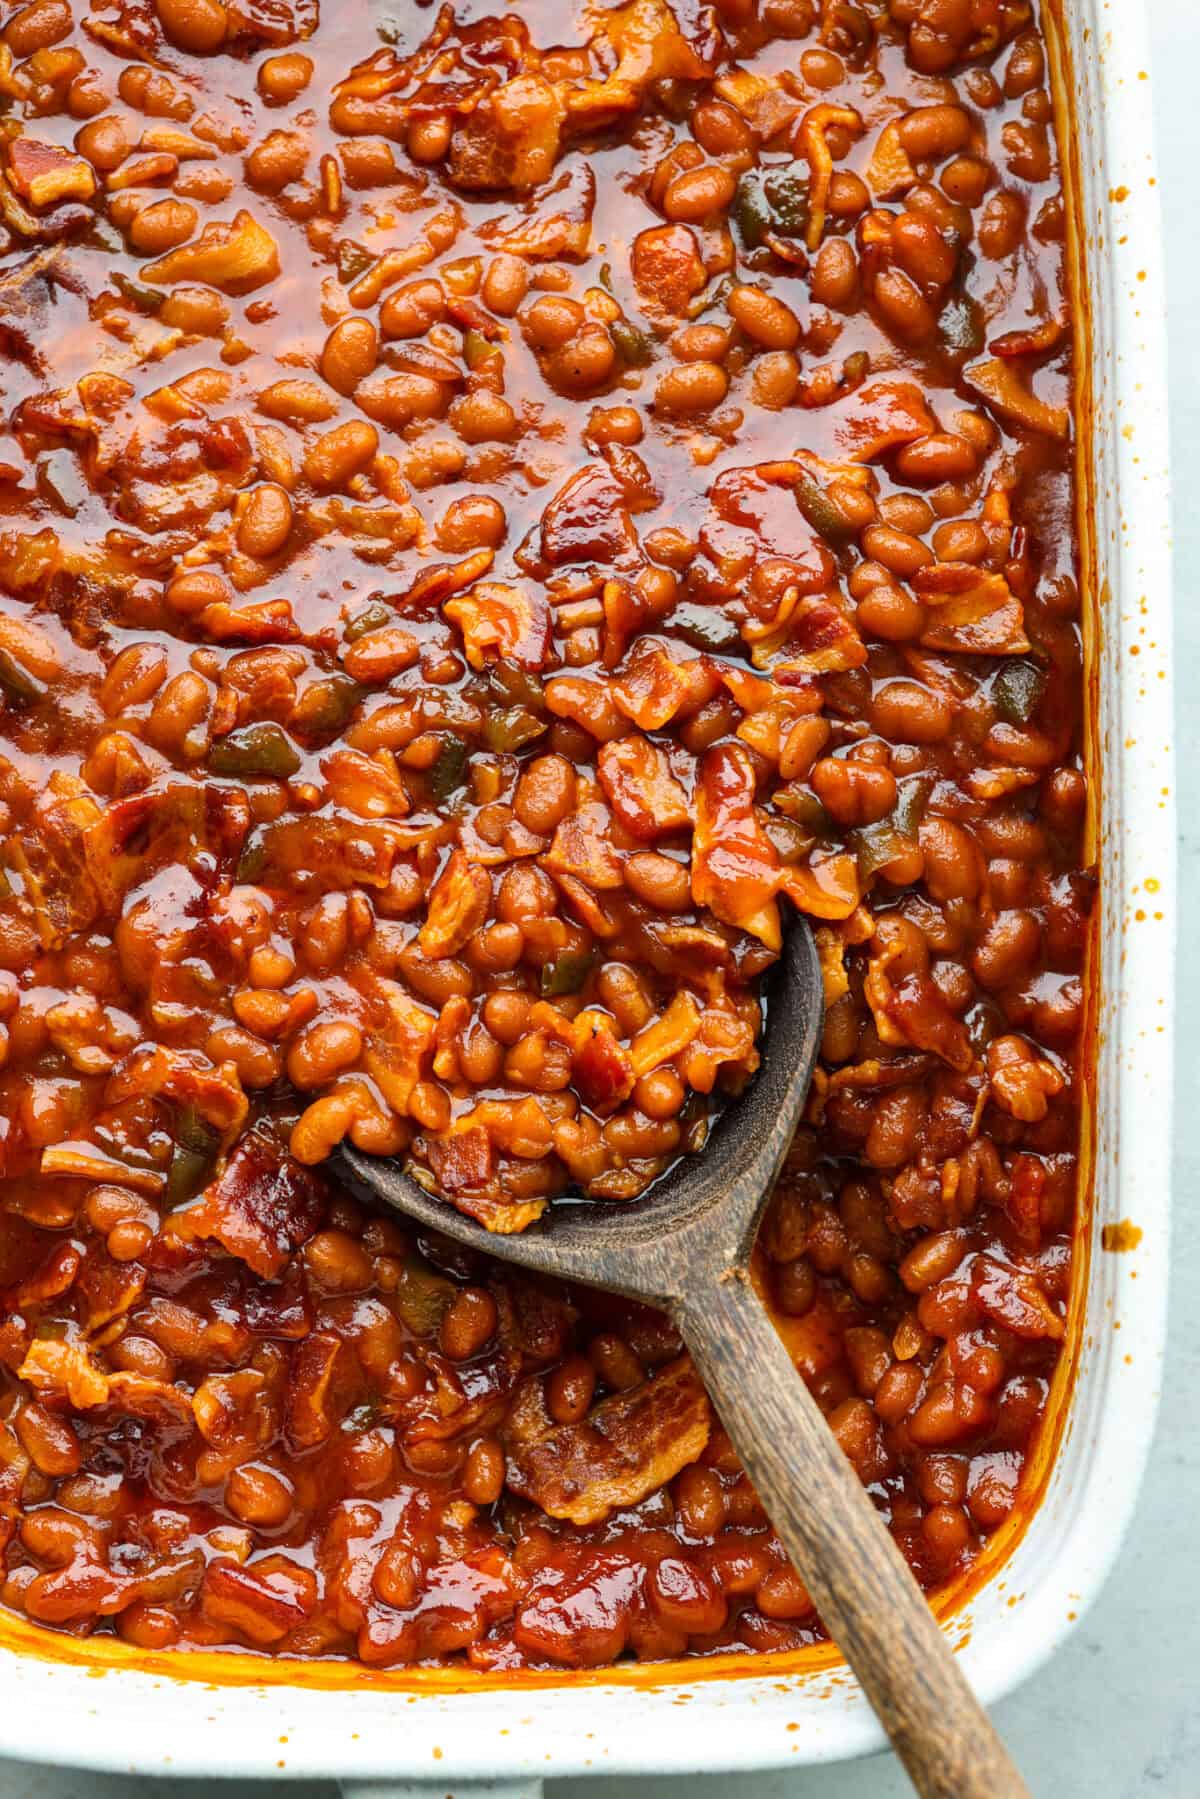 Close view of the baked beans in a baking dish with a wooden spoon.